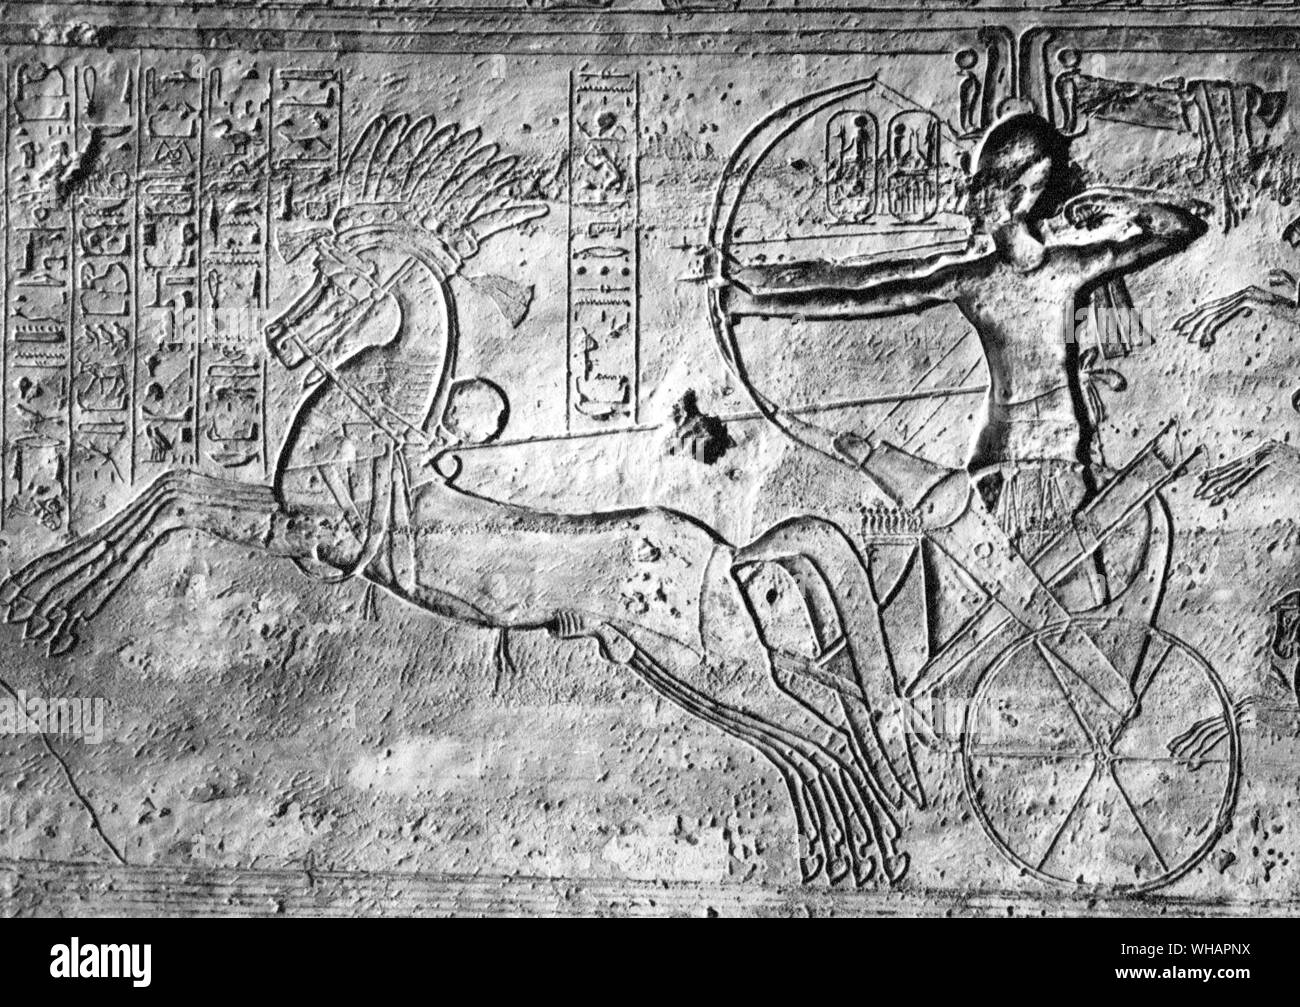 Rameses II in his Chariot. Rameses II (19th dynasty), son of Seti I, was around thirty years old when he became king of Egypt - and then reigned for 67 years. He had many wives, among them some of his own near relatives, and was the father of about 111 sons and 51 daughters. . Stock Photo